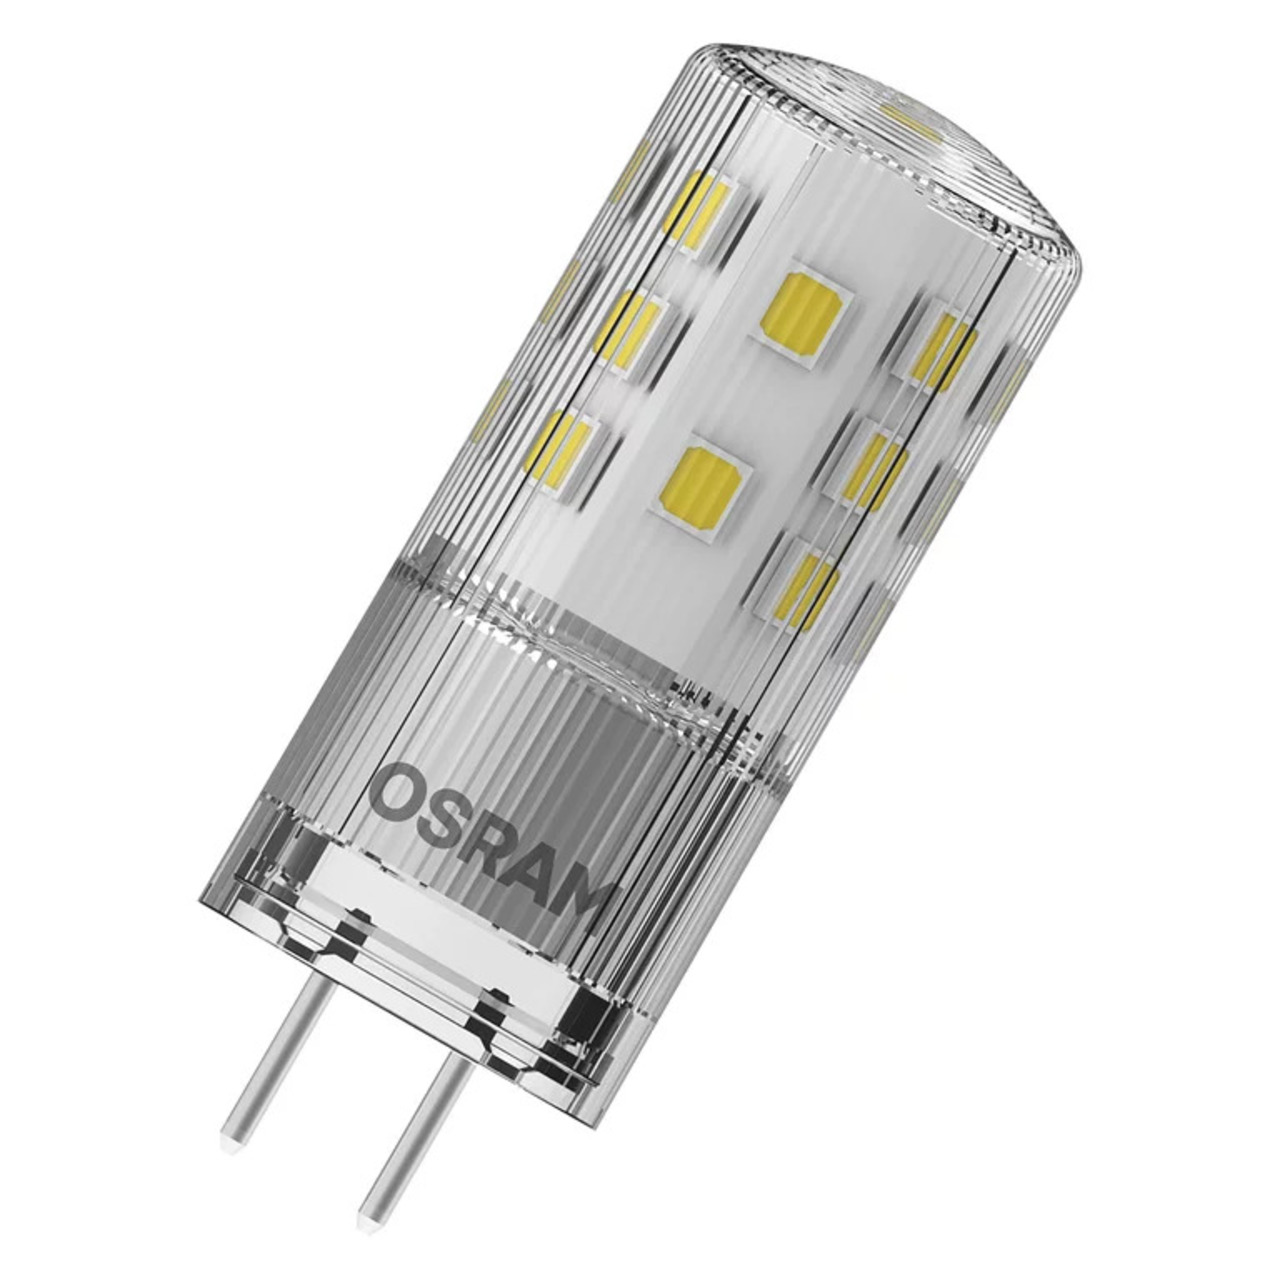 OSRAM 4-5-W-LED-Lampe T18- GY6-35- 470 lm- warmweiss- 320- 12V- dimmbar